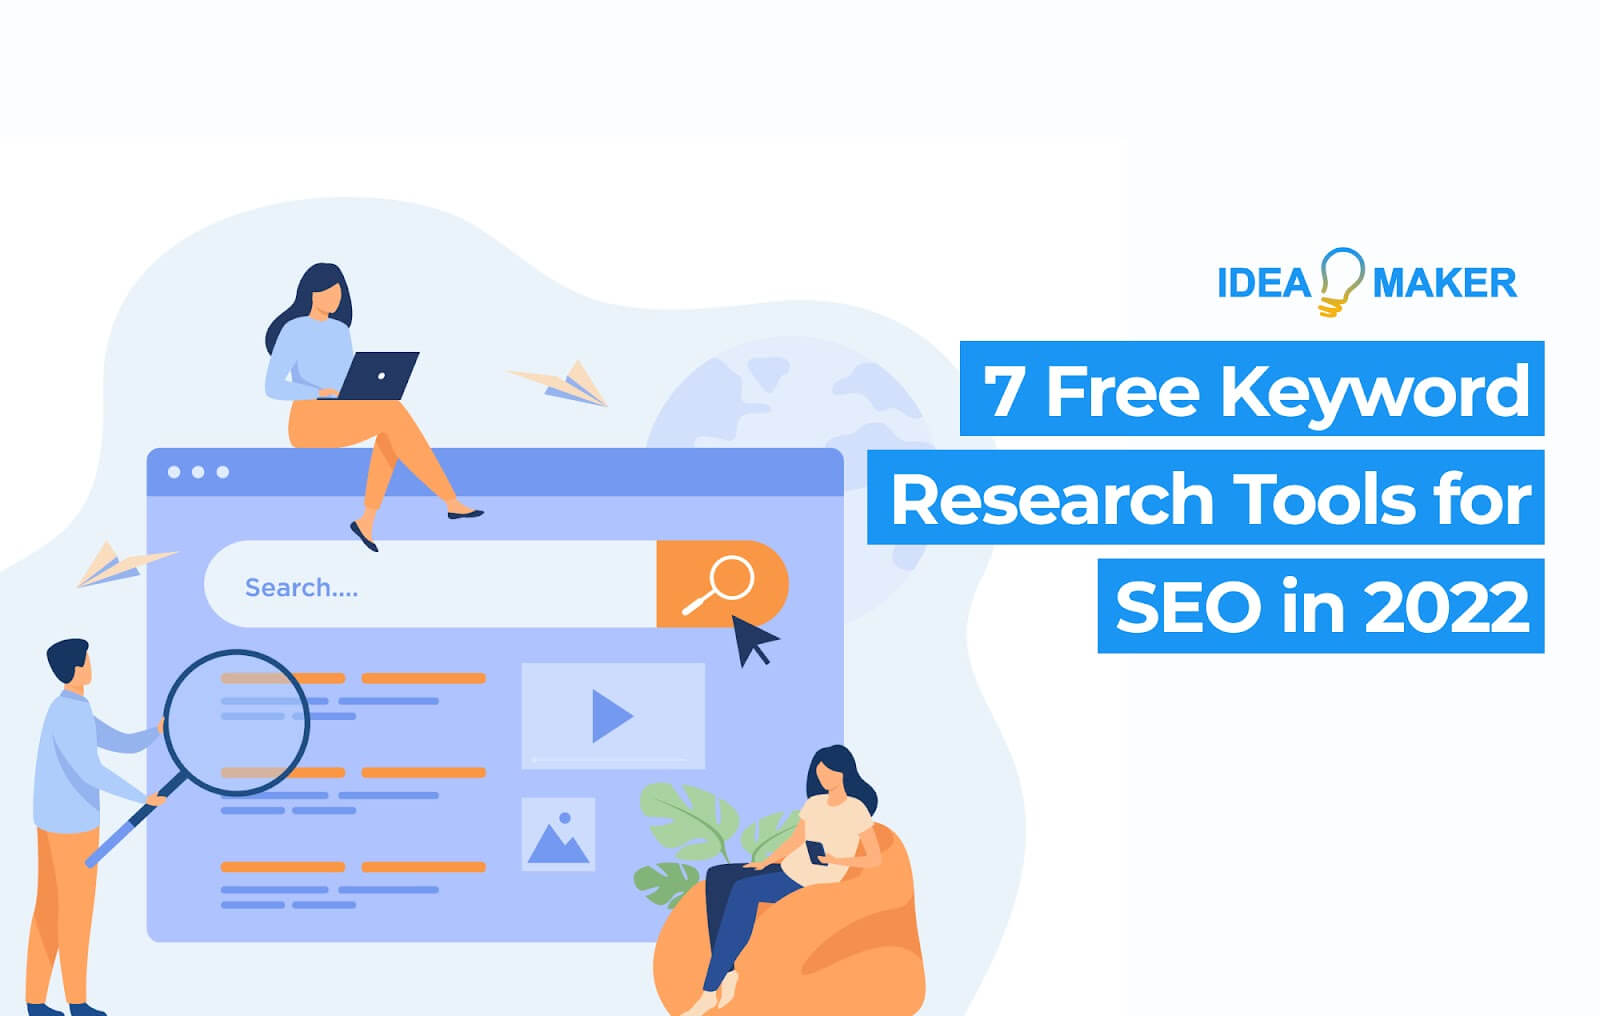 7 Free Keyword Research Tools for SEO in 2022